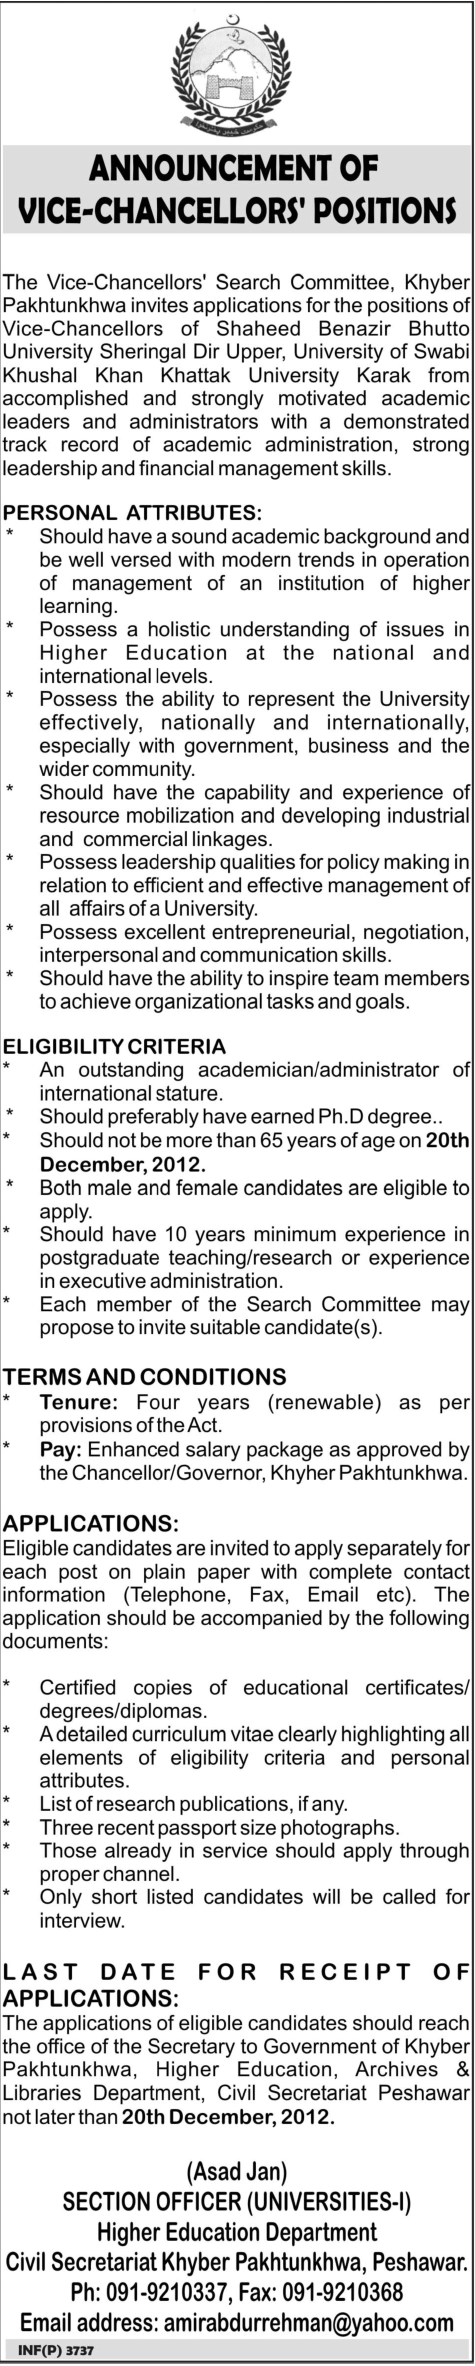 Vice-Chancellors Required for the Universities of Khyber Pakhtunkhwa 2012